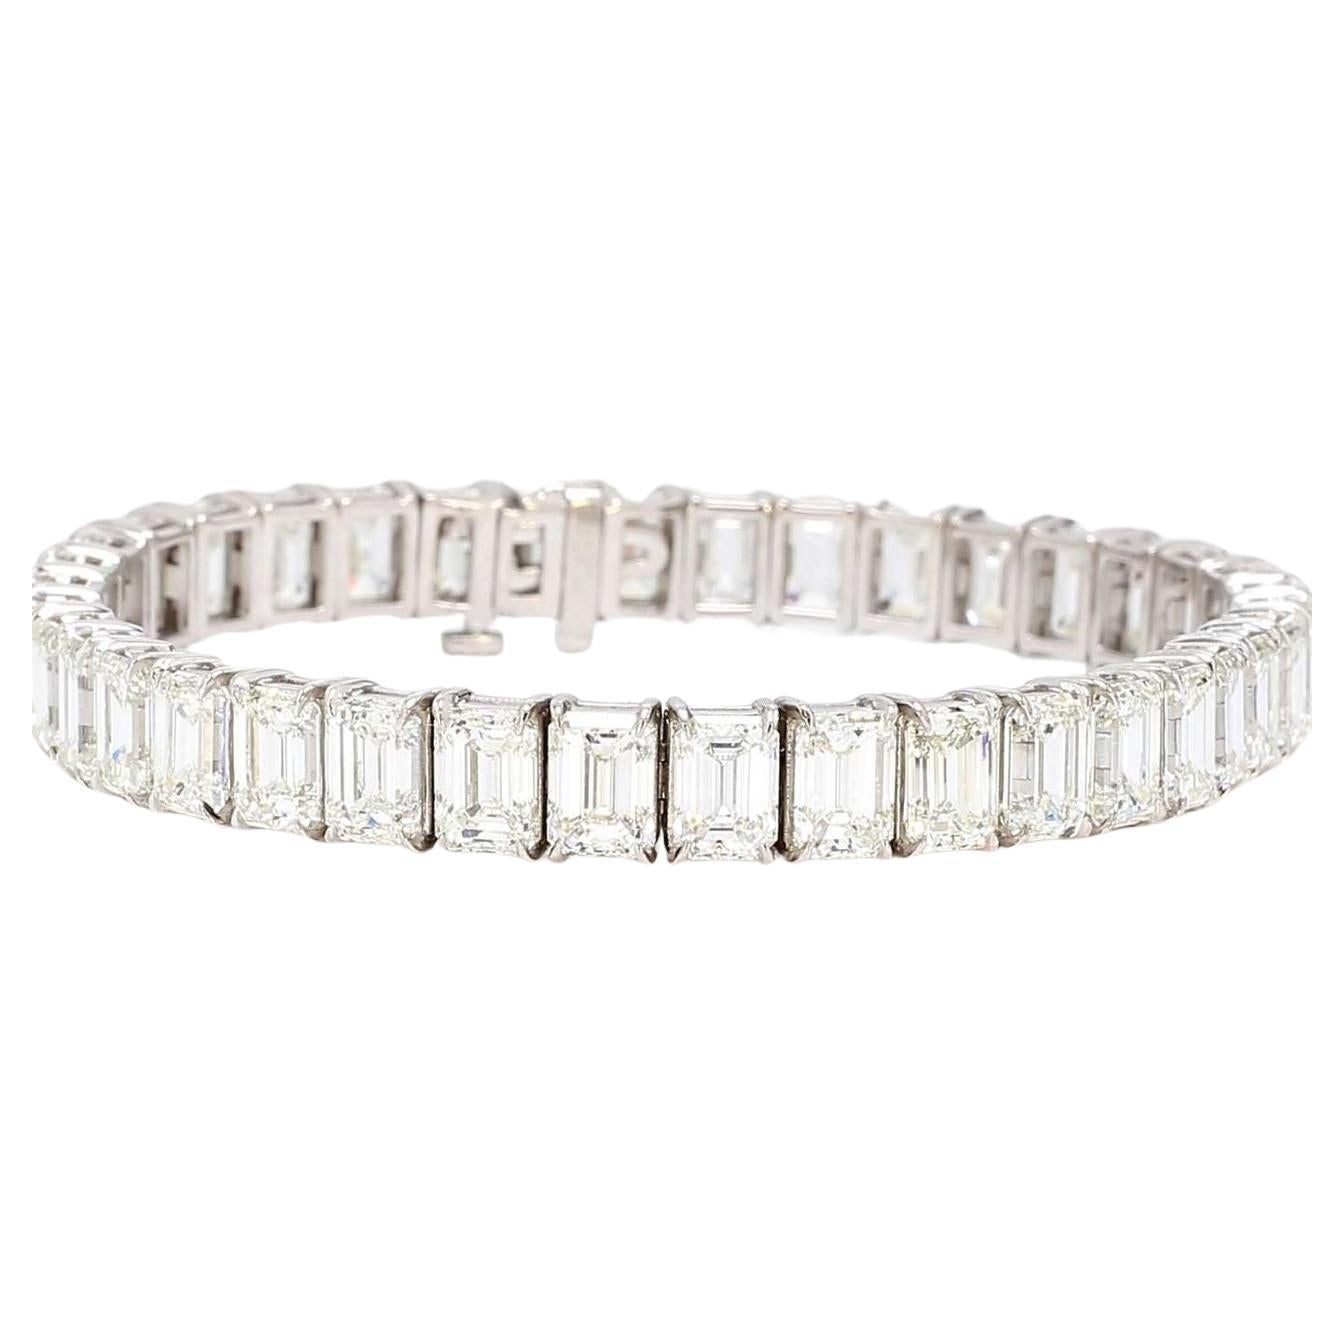 7' Platinum Tennis Bracelet adorned with 45 emerald cut diamonds, each meticulously set in a 4-prong claw basket. Every diamond is GIA certified, ensuring exceptional quality and brilliance.

Crafted in luxurious platinum, this timeless piece exudes